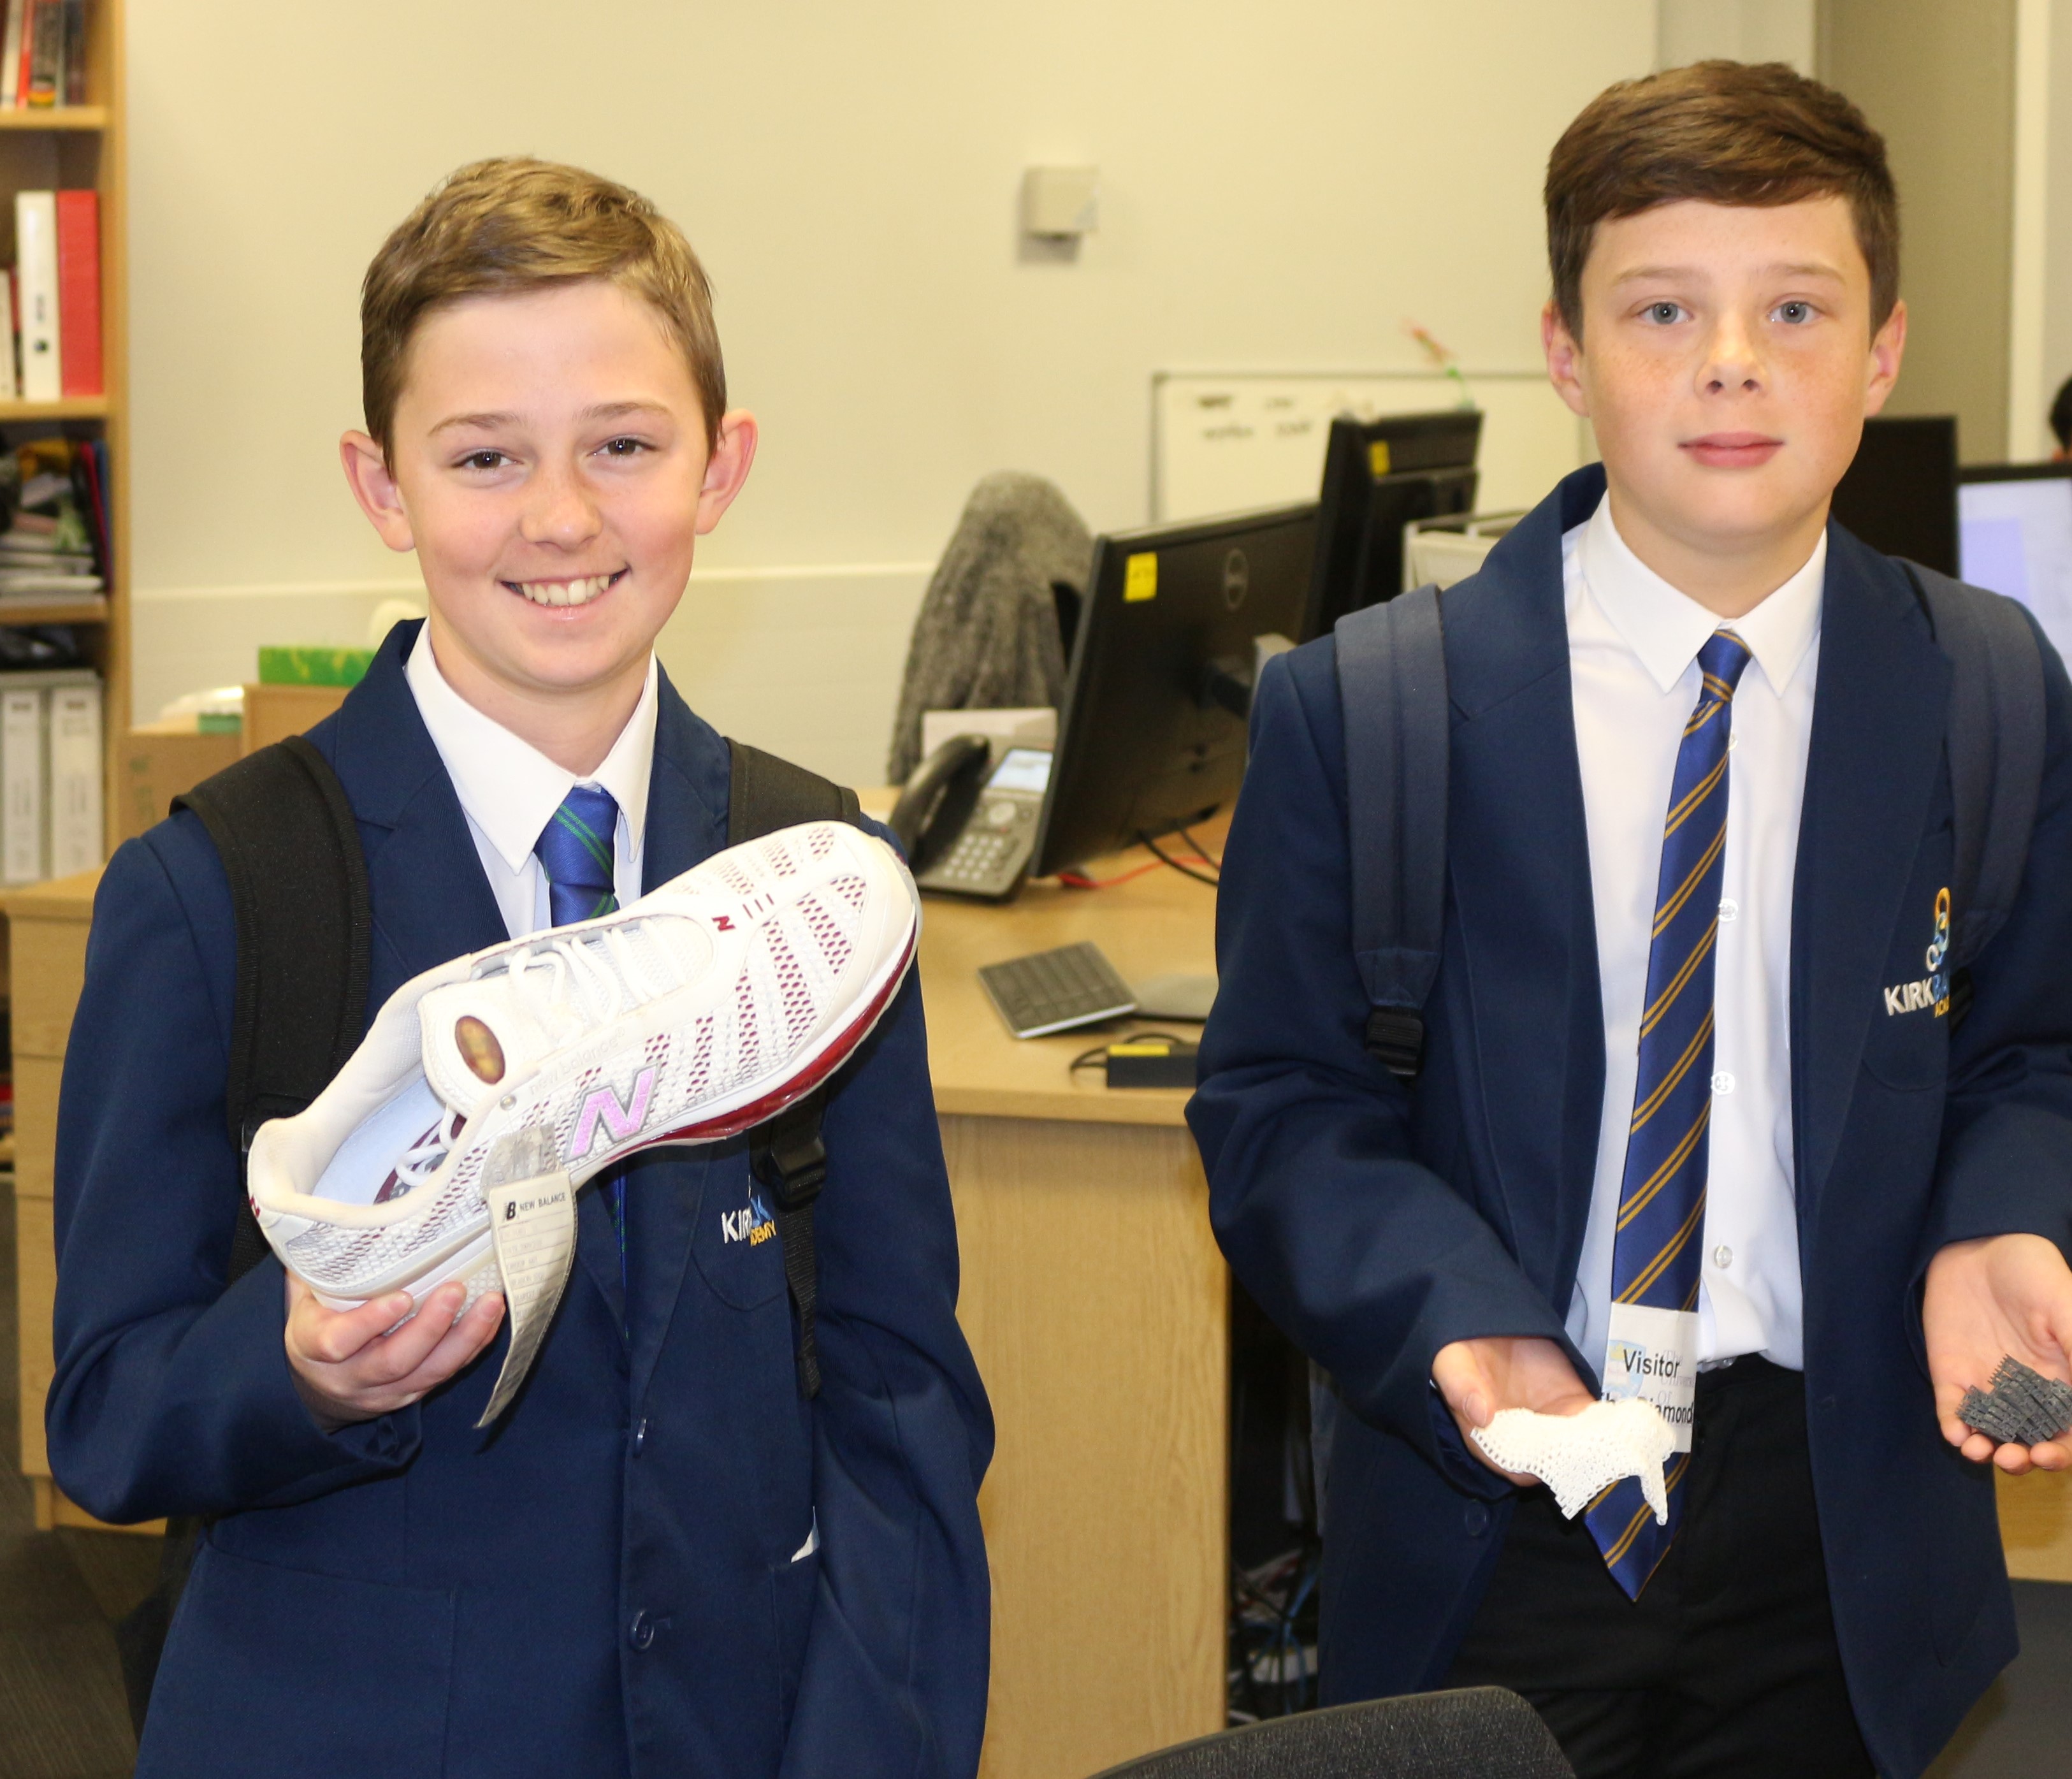 Two Kirk Balk pupils holding items made via additive manufacturing - Two Kirk Balk pupils holding items made via additive manufacturing during a visit to The University of Sheffield